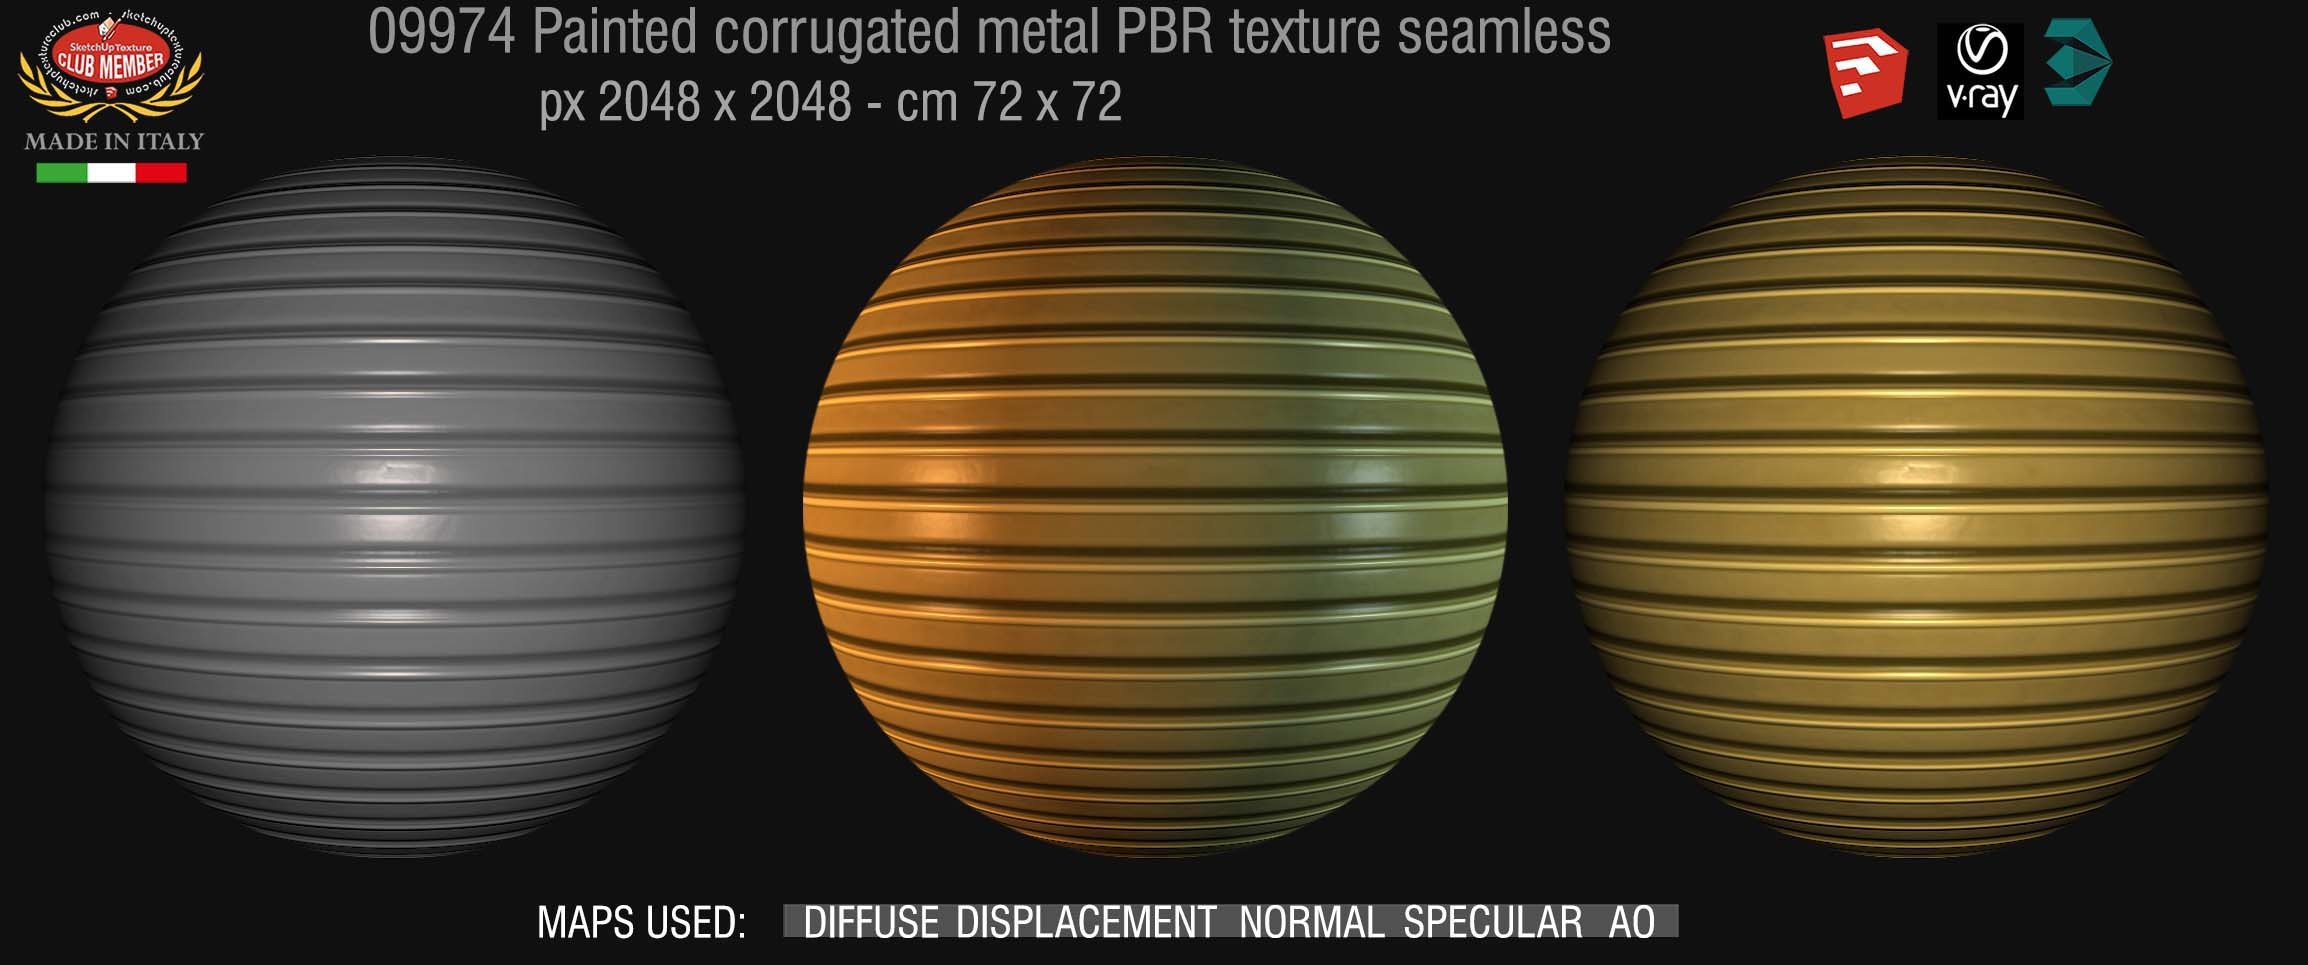 09974 Painted corrugated metal PBR texture seamless DEMO